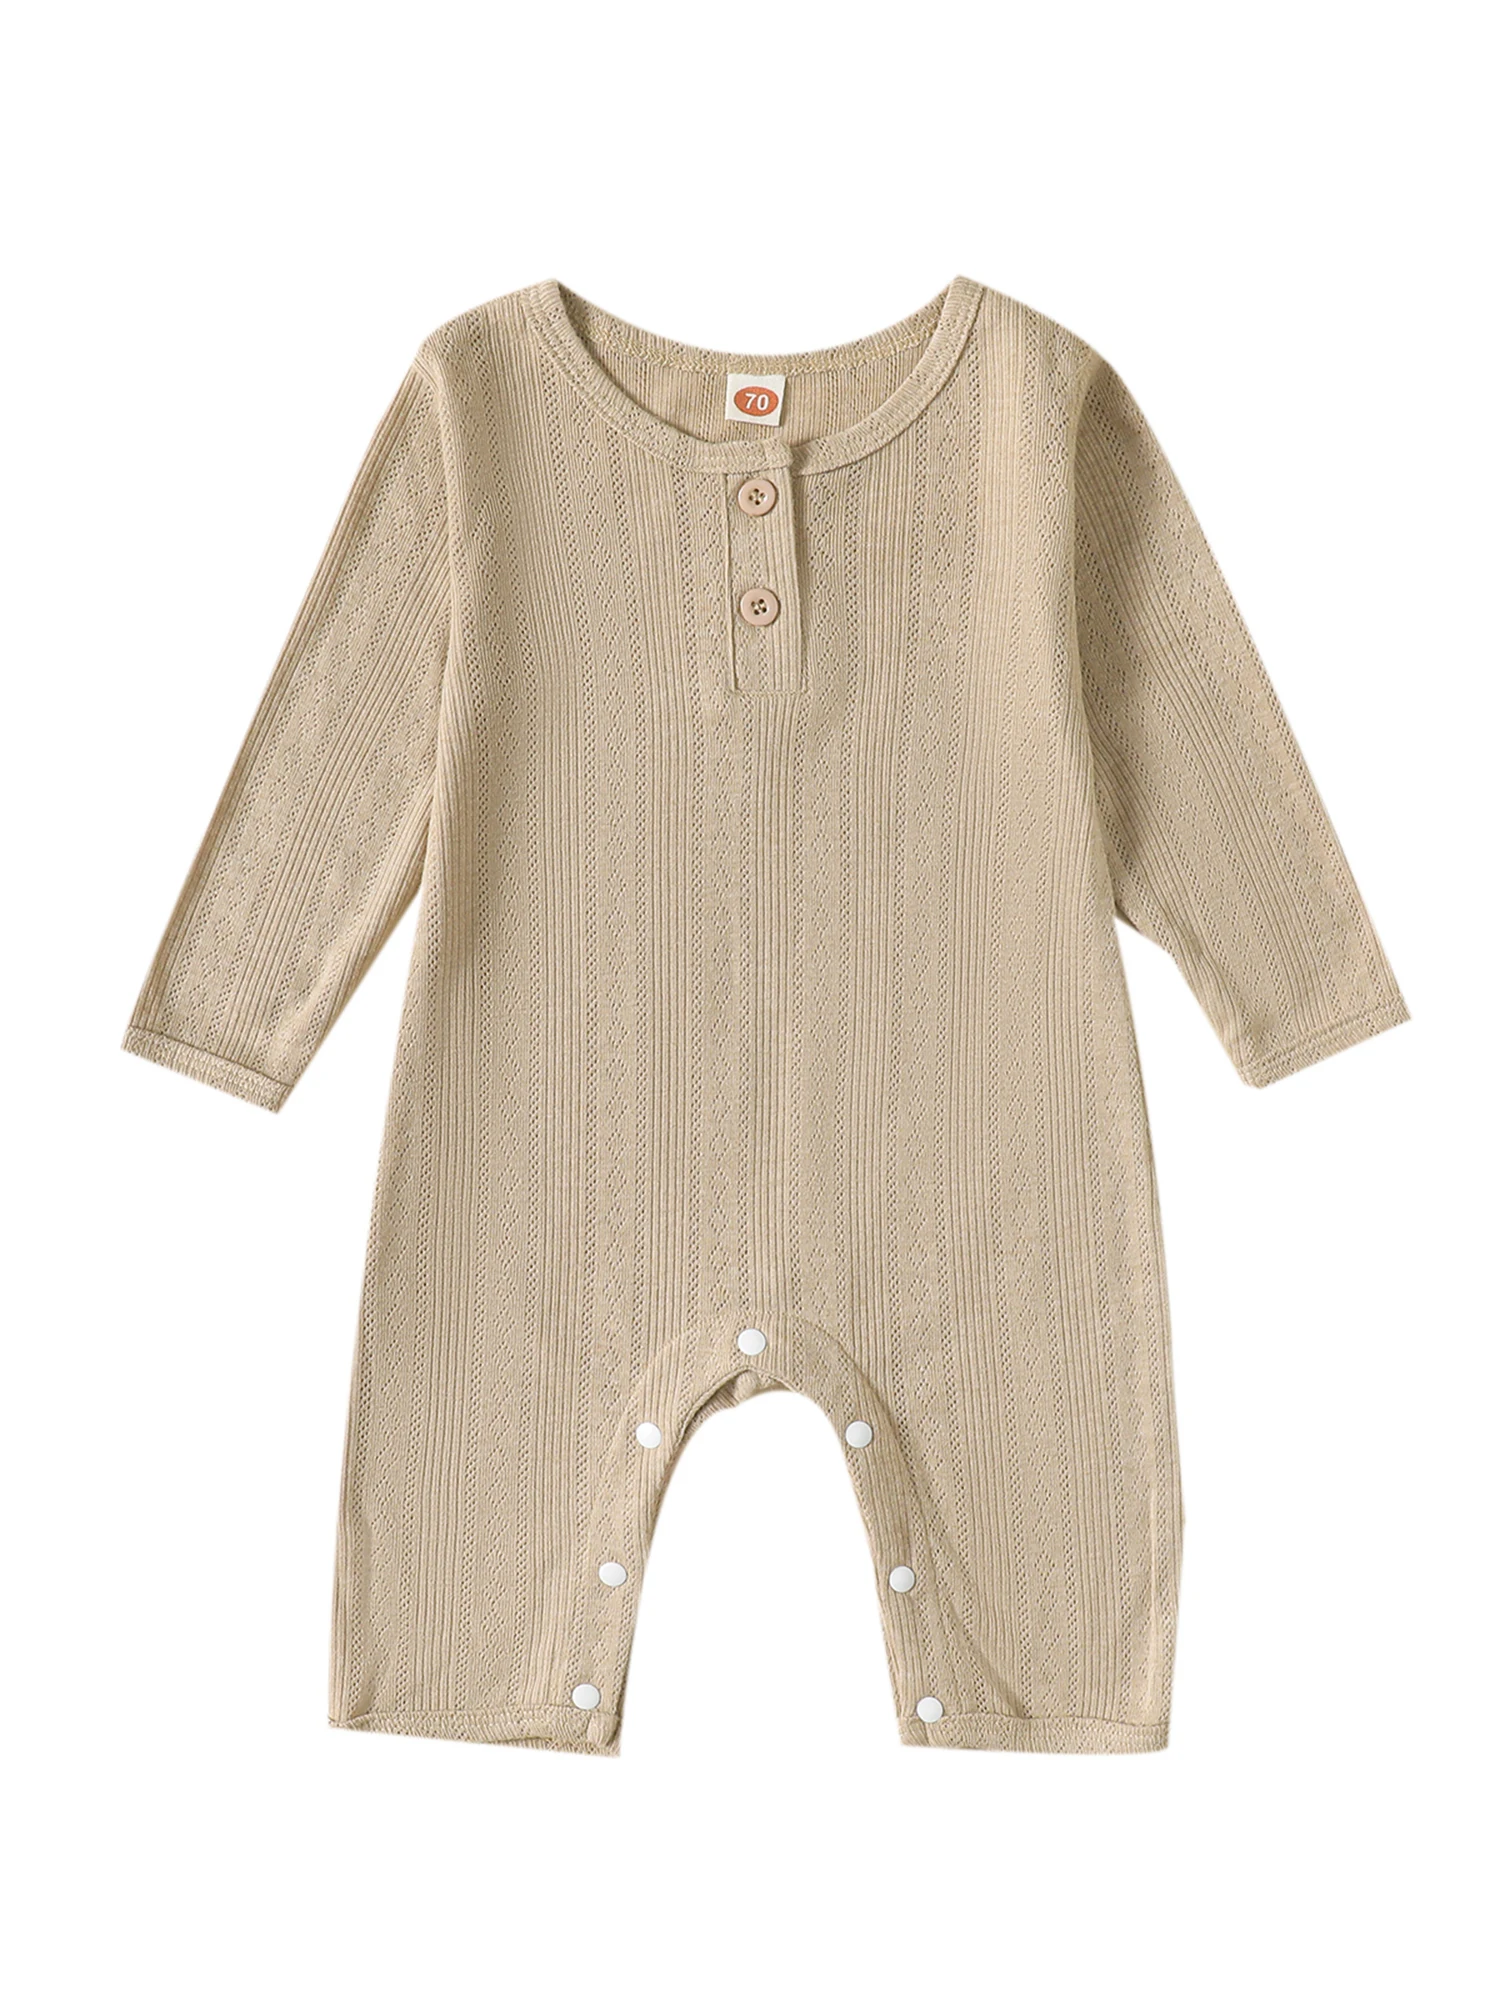 

Cute and Cozy Unisex Baby Romper with Long Sleeves and Button Closure - Adorable Infant Jumpsuit for Fall Season